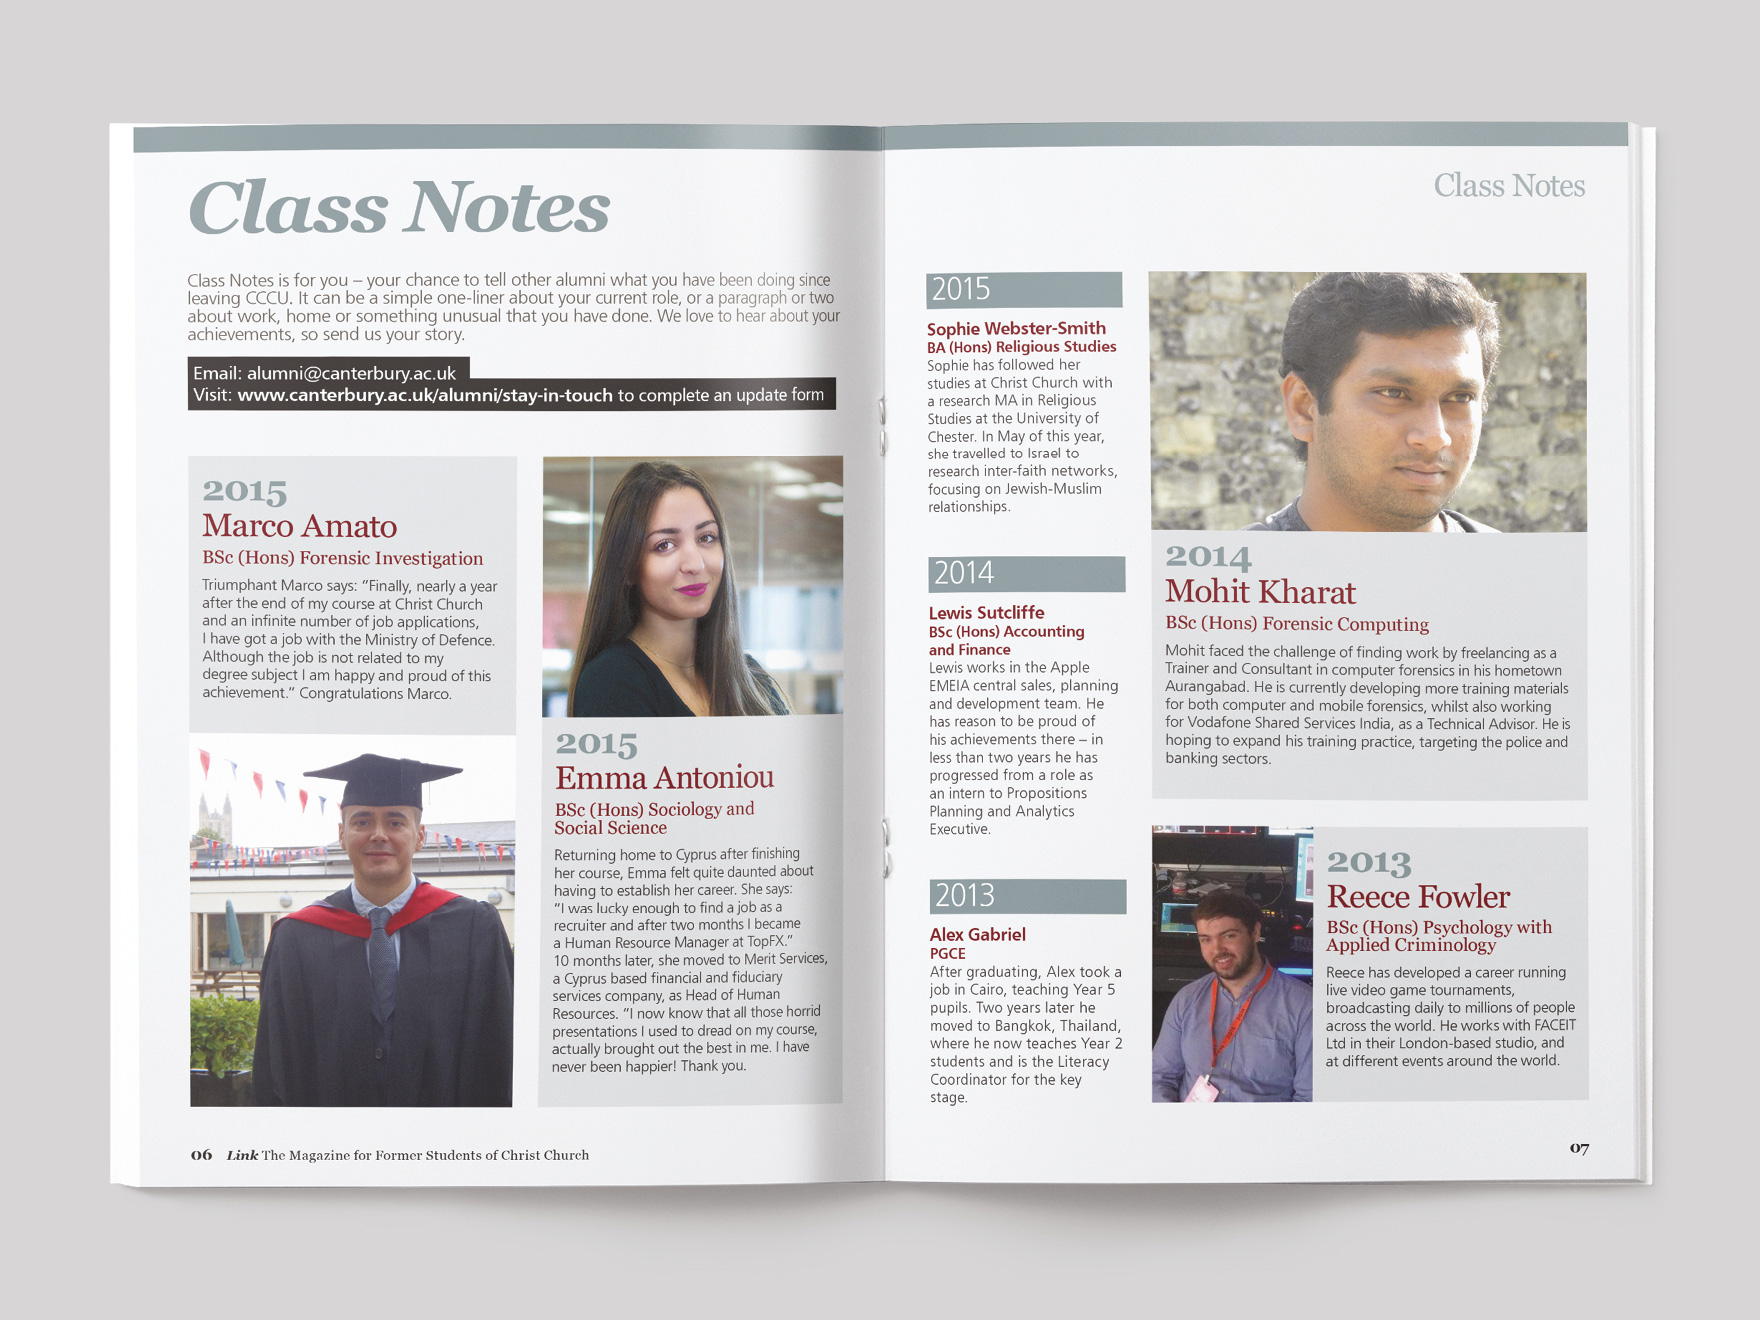 Inside pages from Link magazine, showing the class notes section